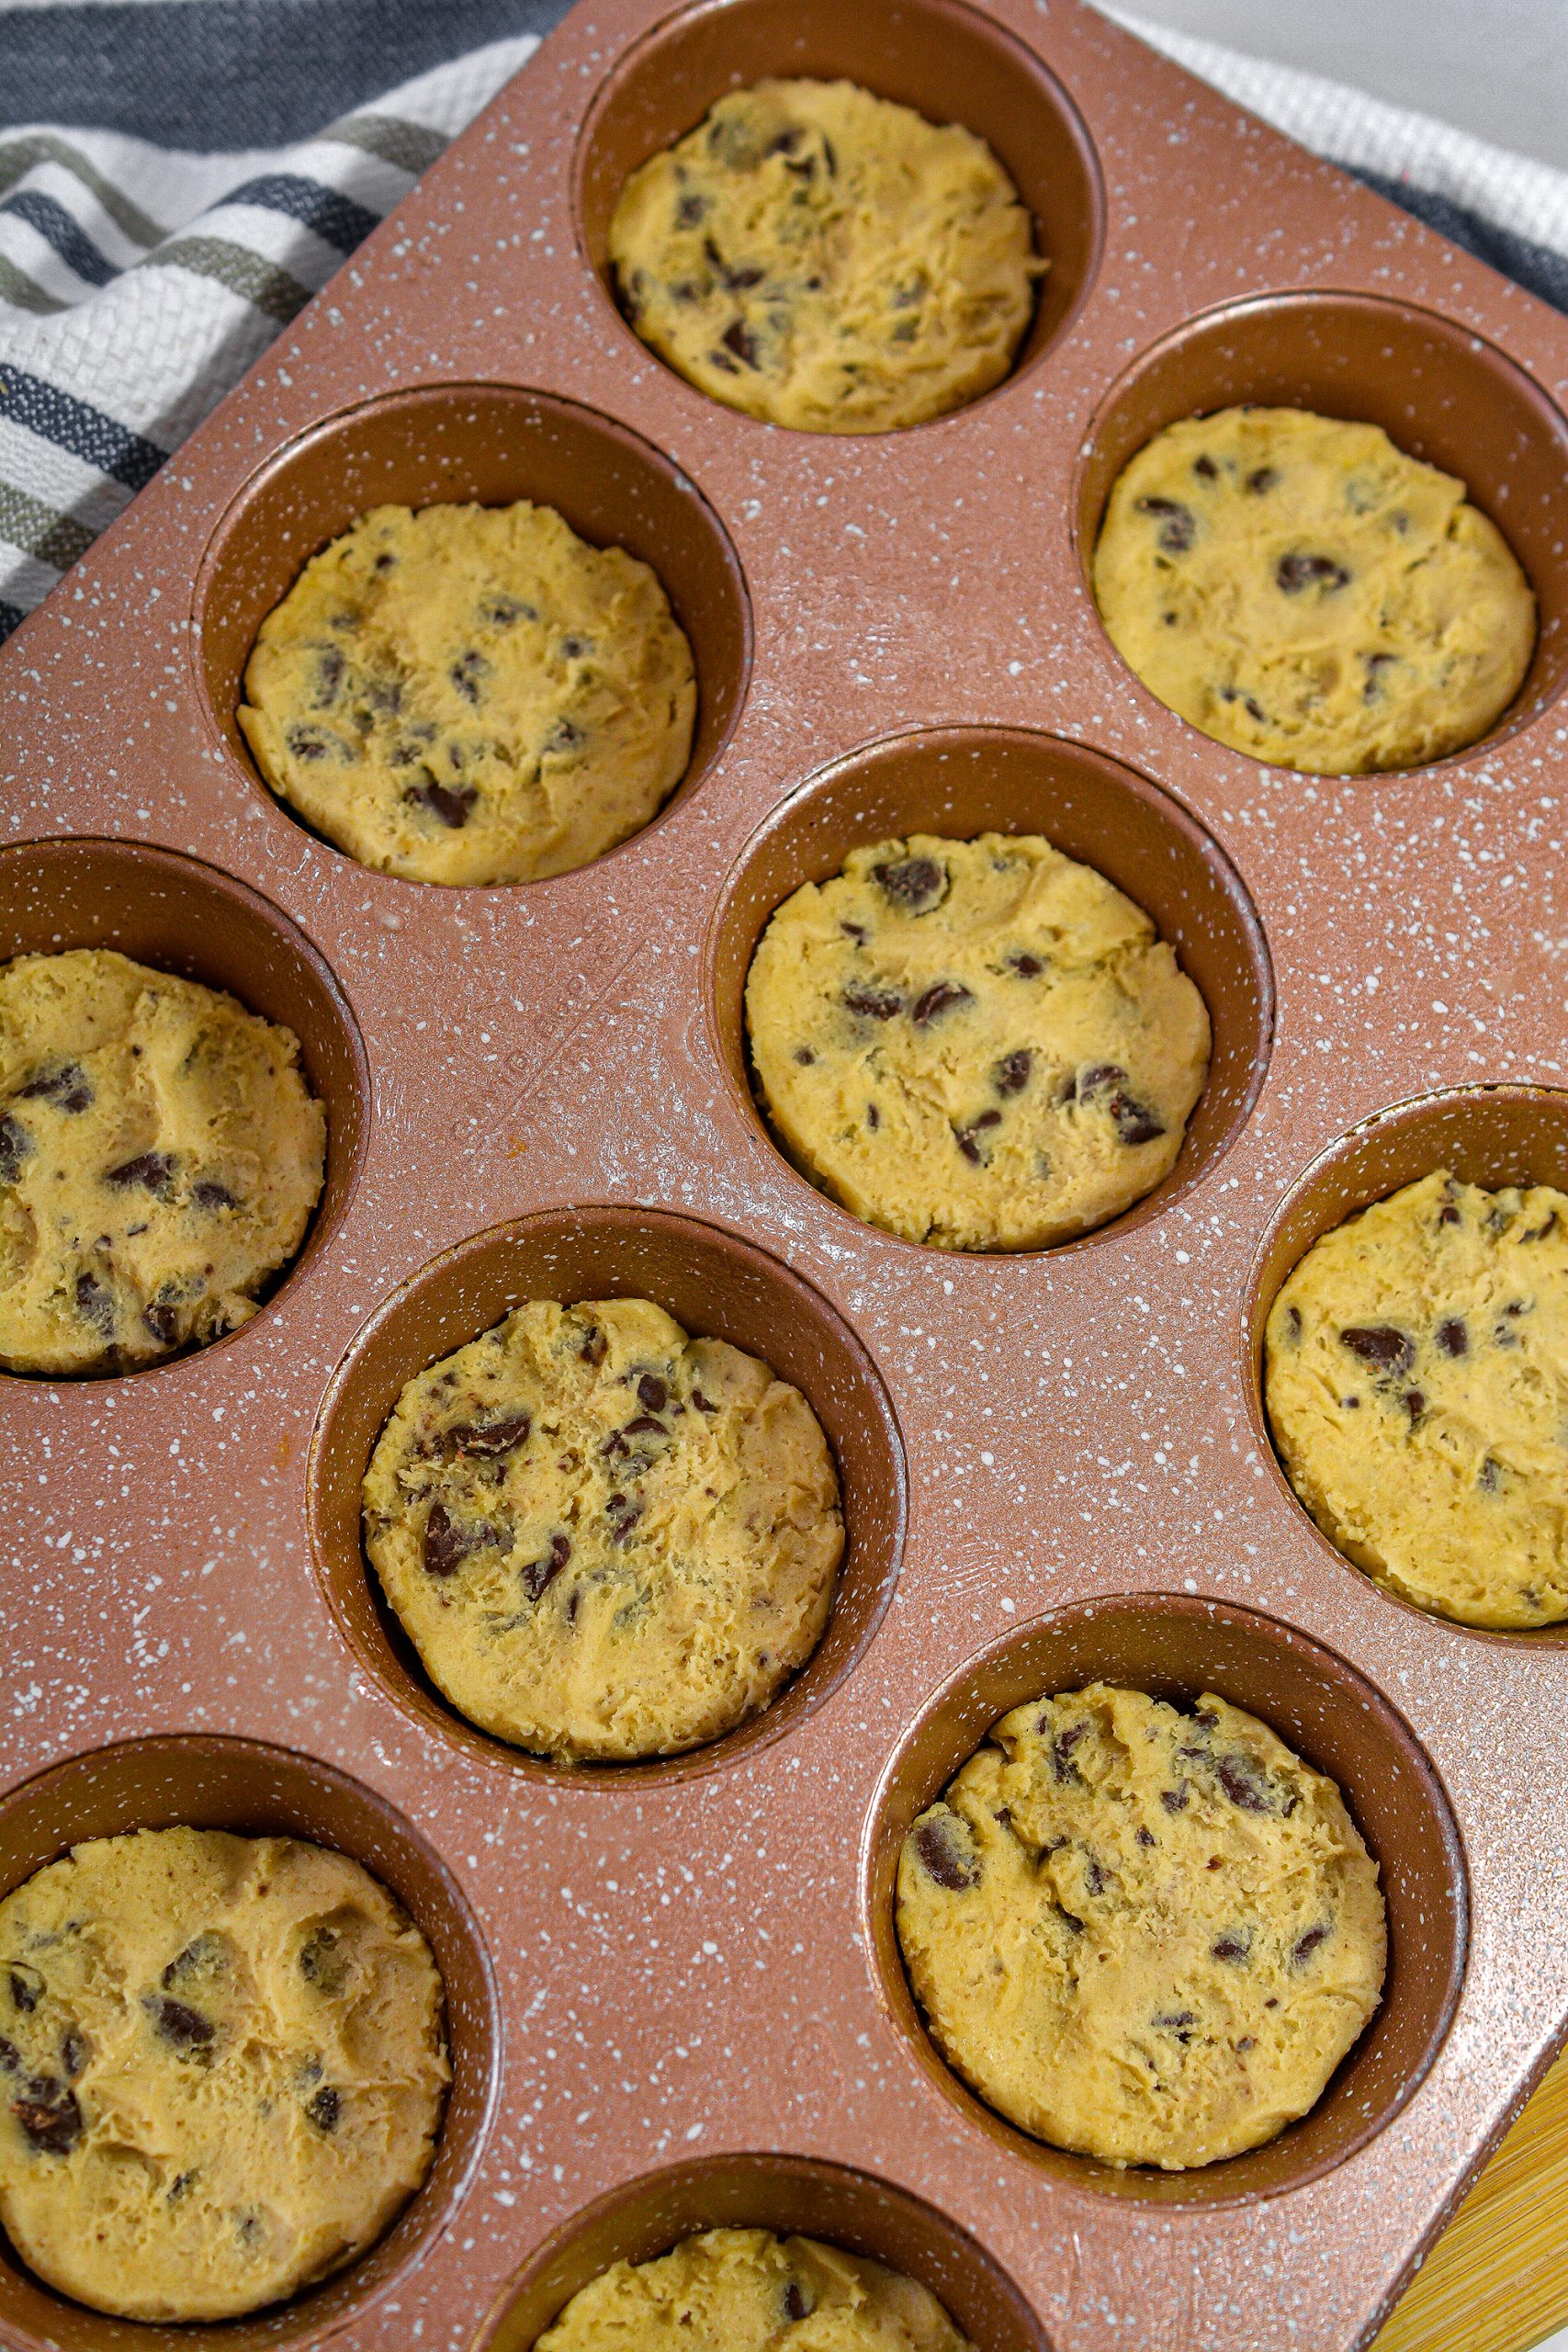 Separate the cookie dough into 12 even sections, and press one section into each of the cups of the muffin tin.